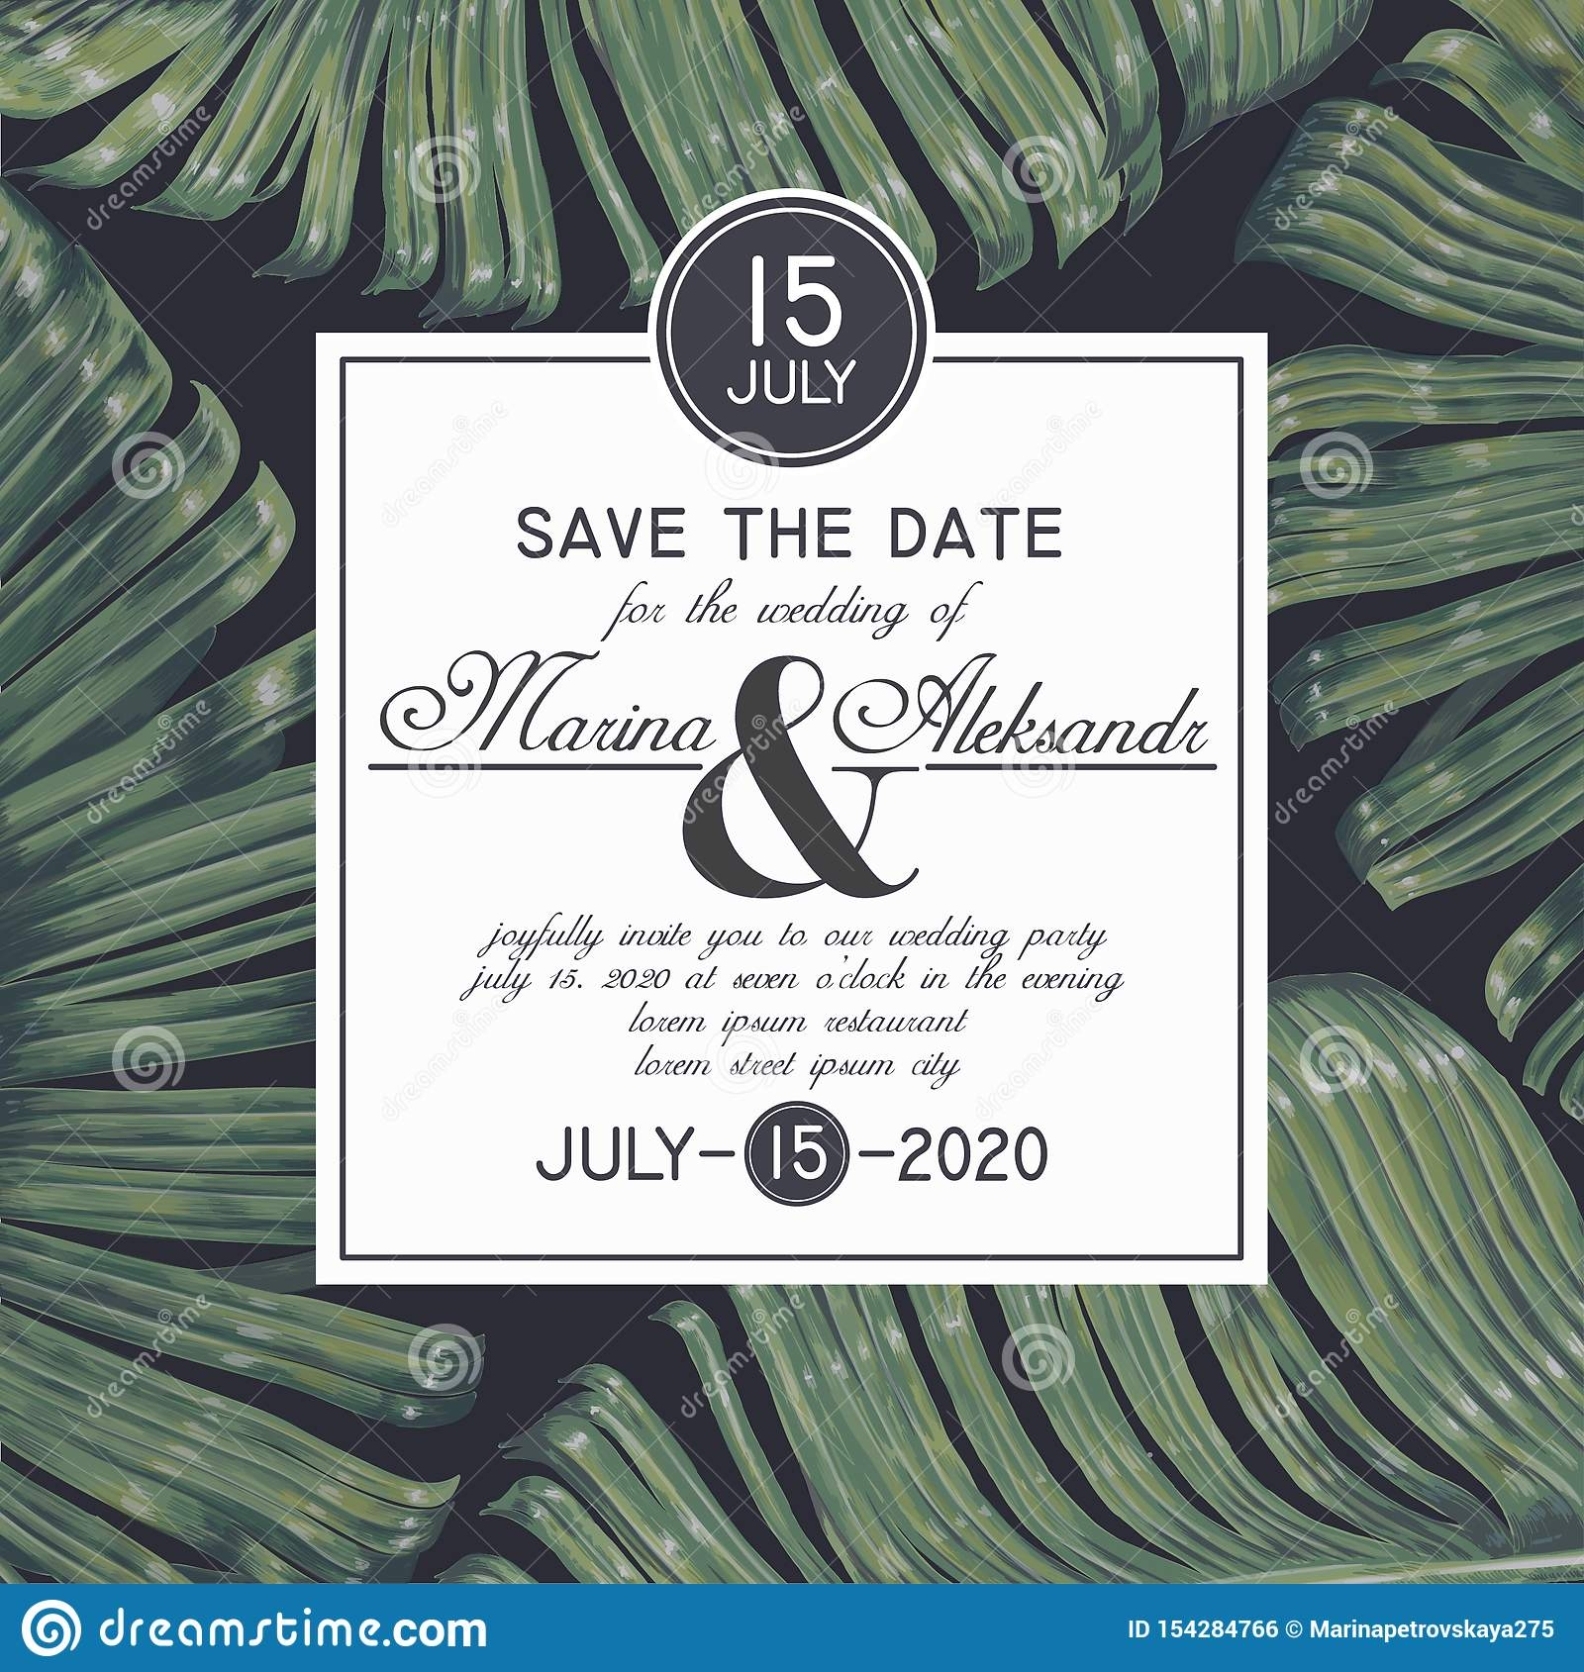 Save The Date Flyer Template Throughout Save The Date Flyer Template